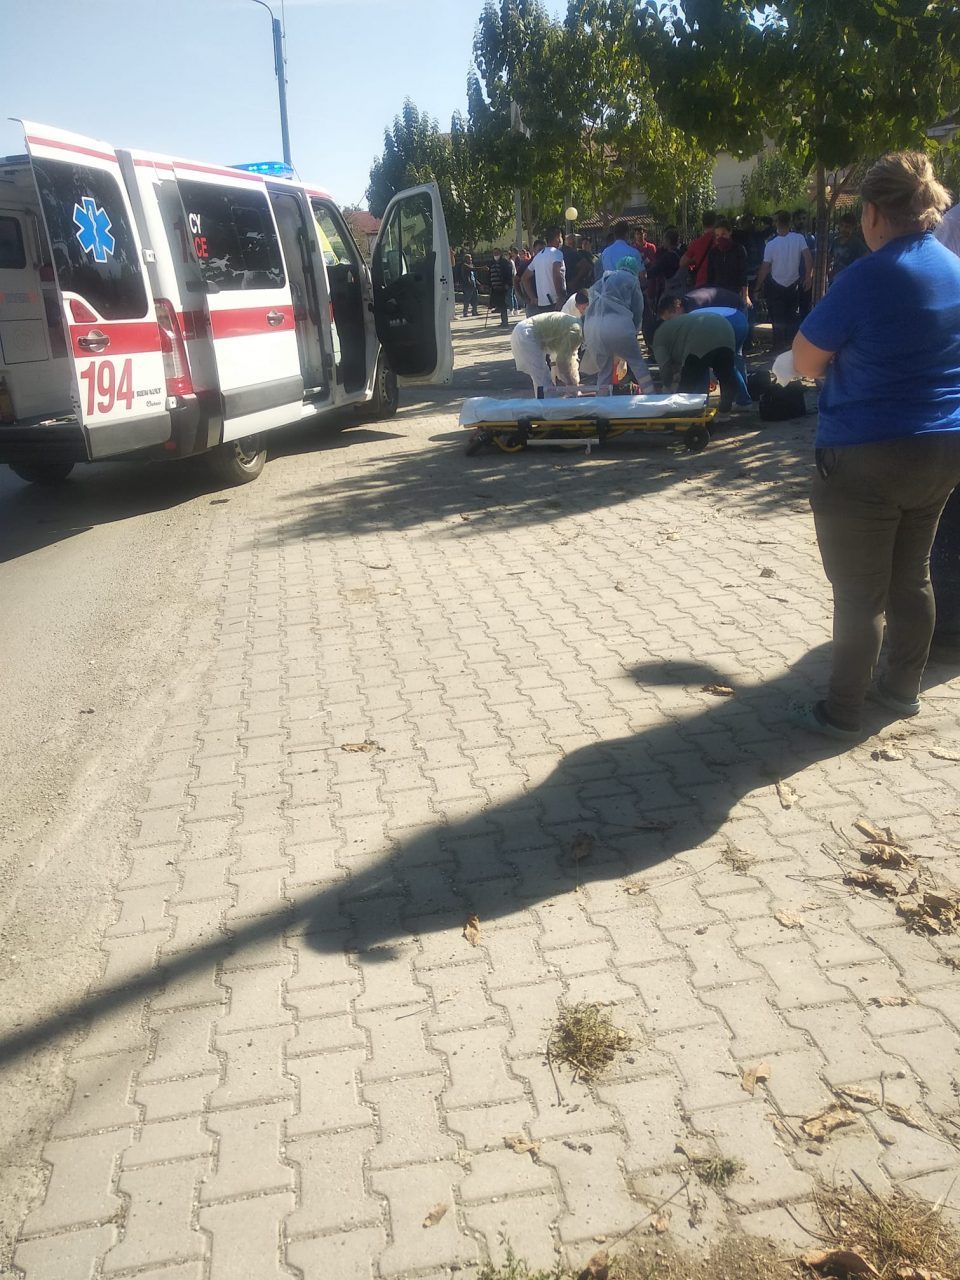 Ten year old child among the victims of a horrific traffic accident near Skopje